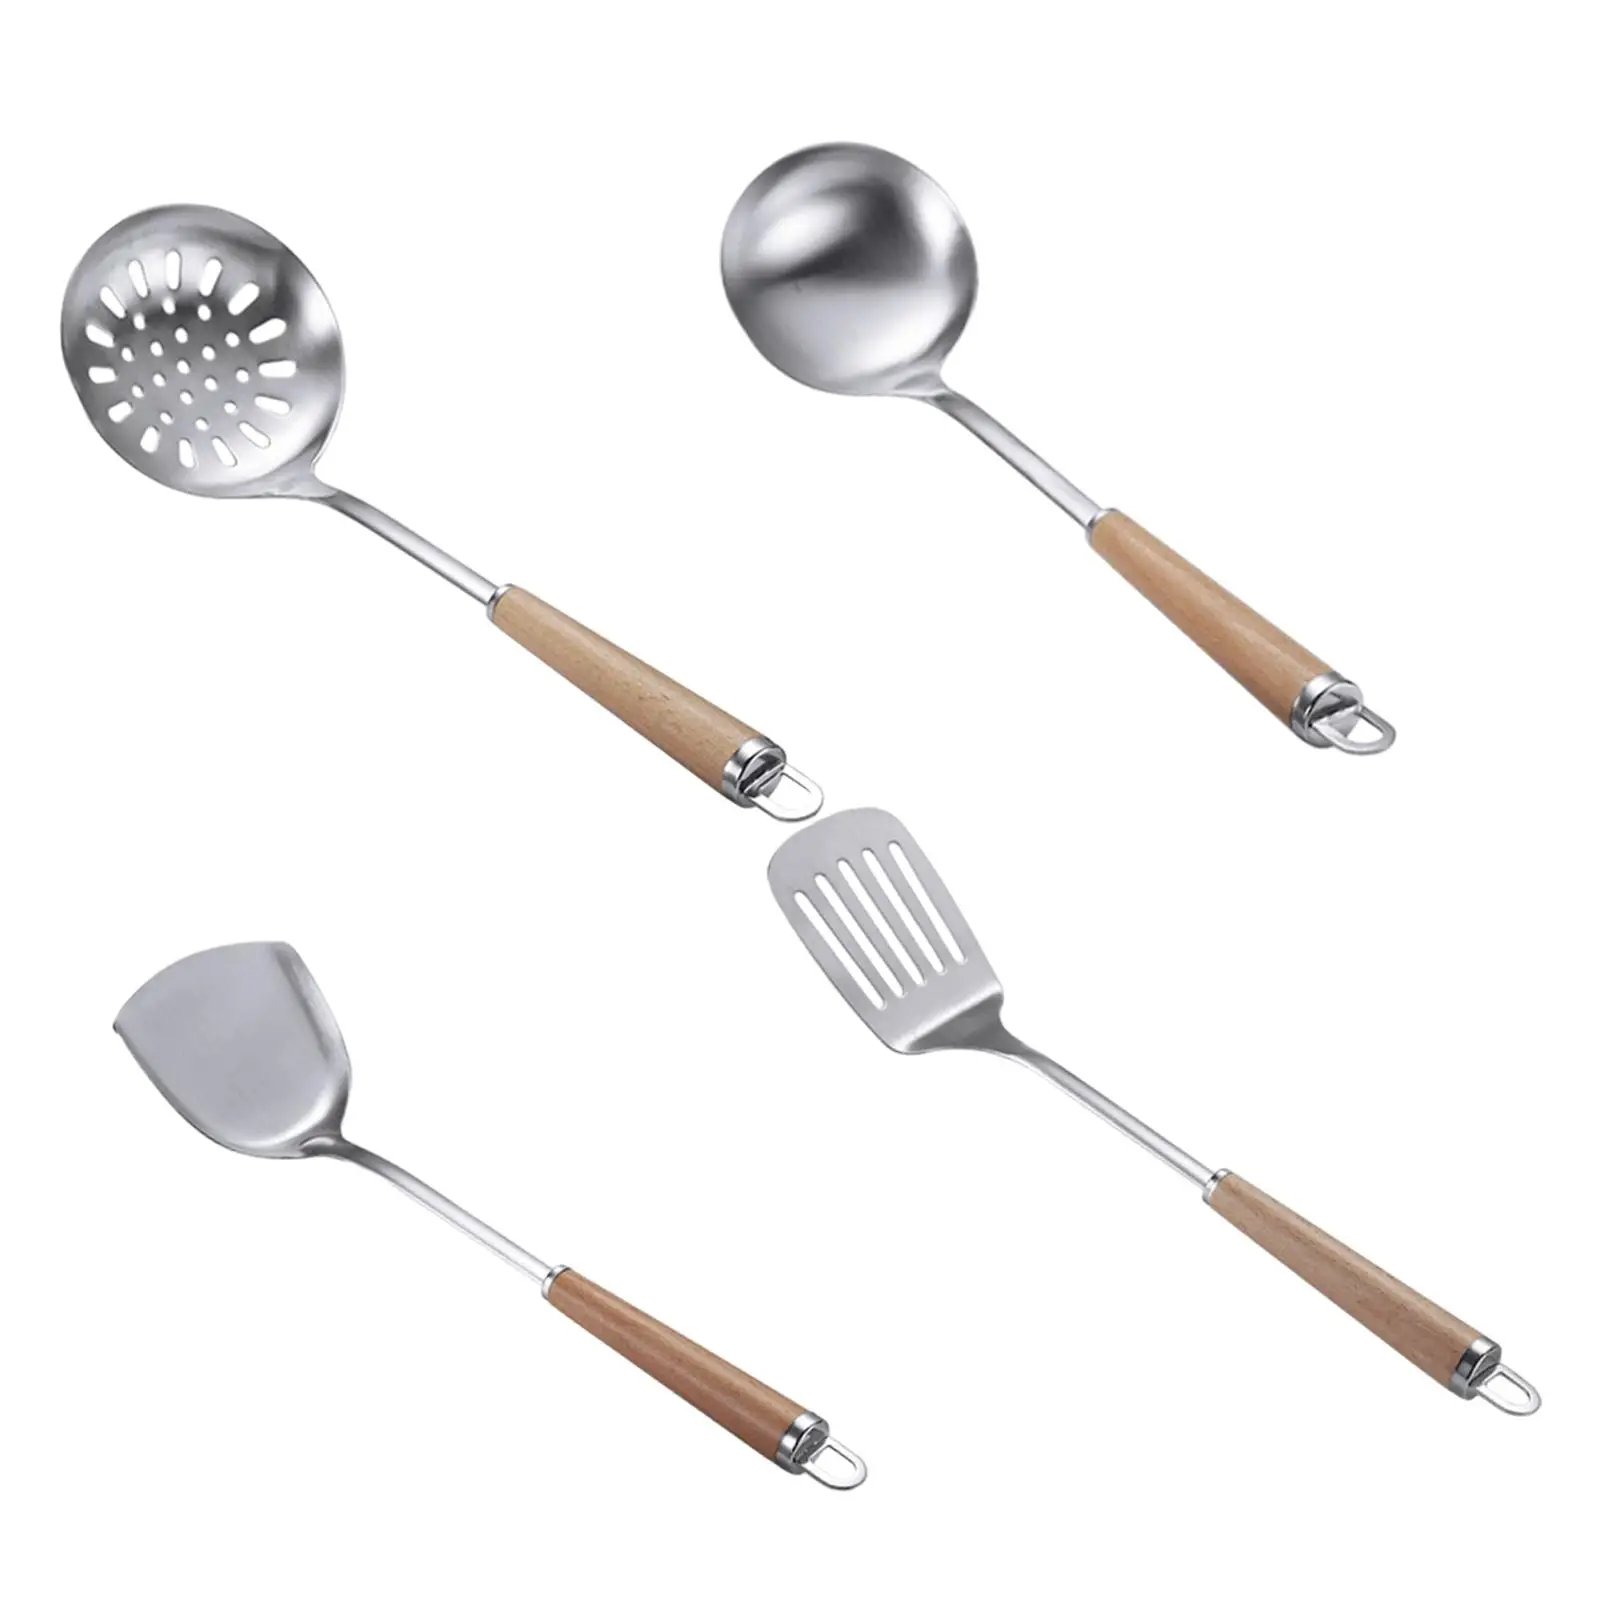 Stainless Steel Cooking Utensils Multifunctional Easy to Clean Practical Cookware for Camping Cooking Picnic Kitchen